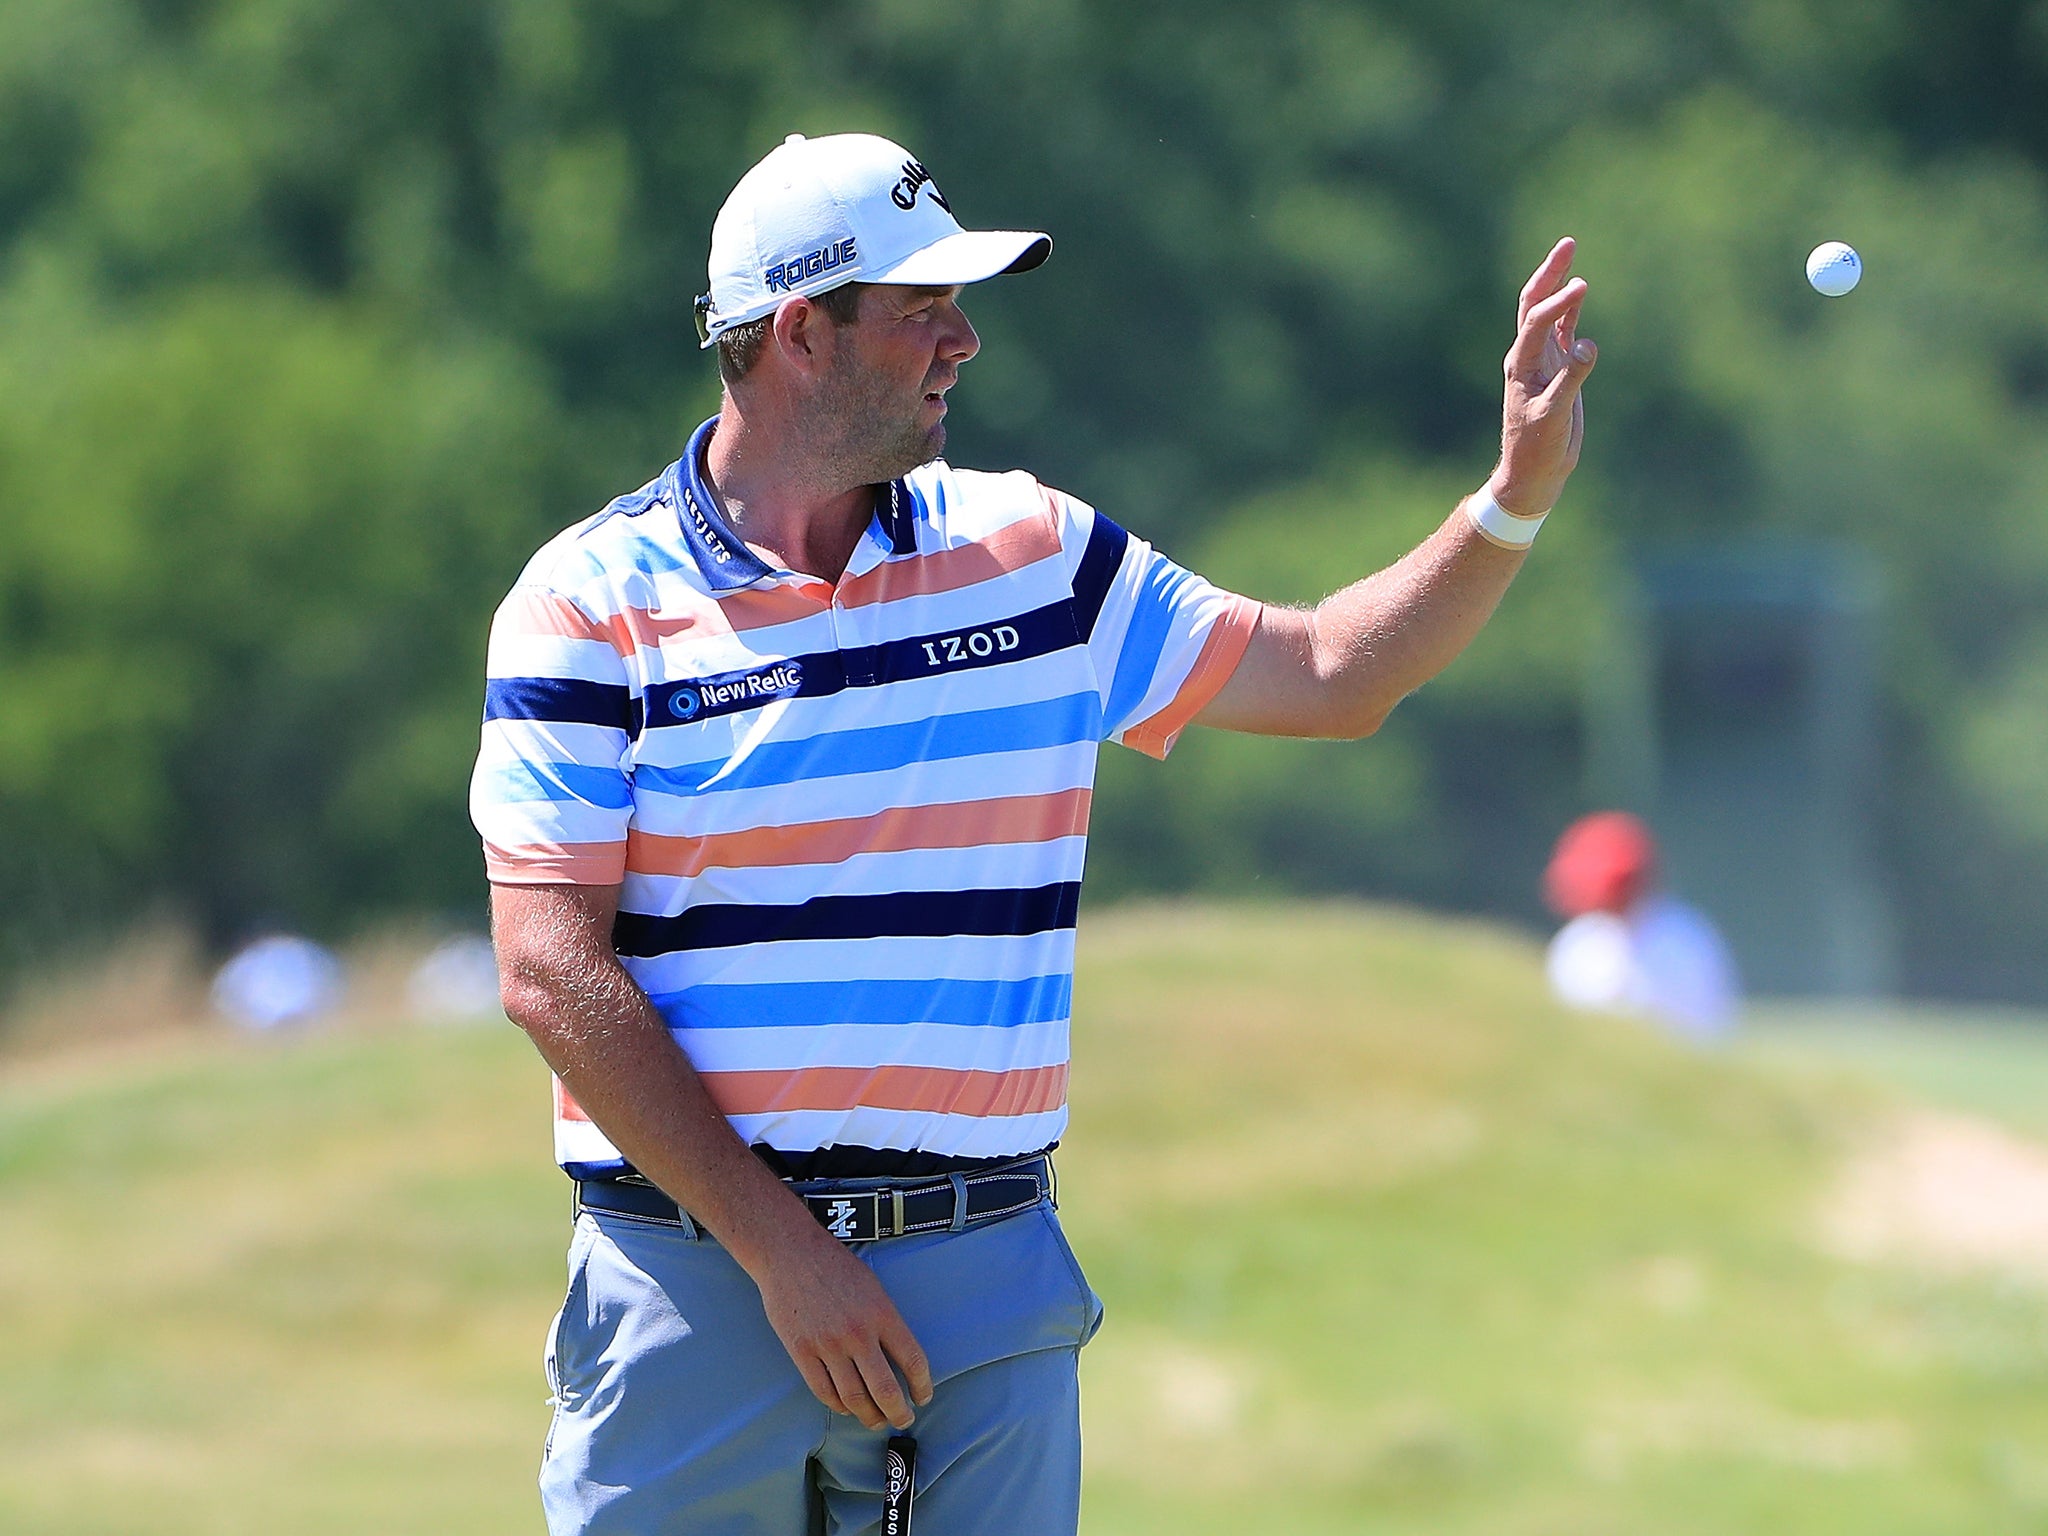 Leishman avoided carding any bogeys on his way to a 10-under 61